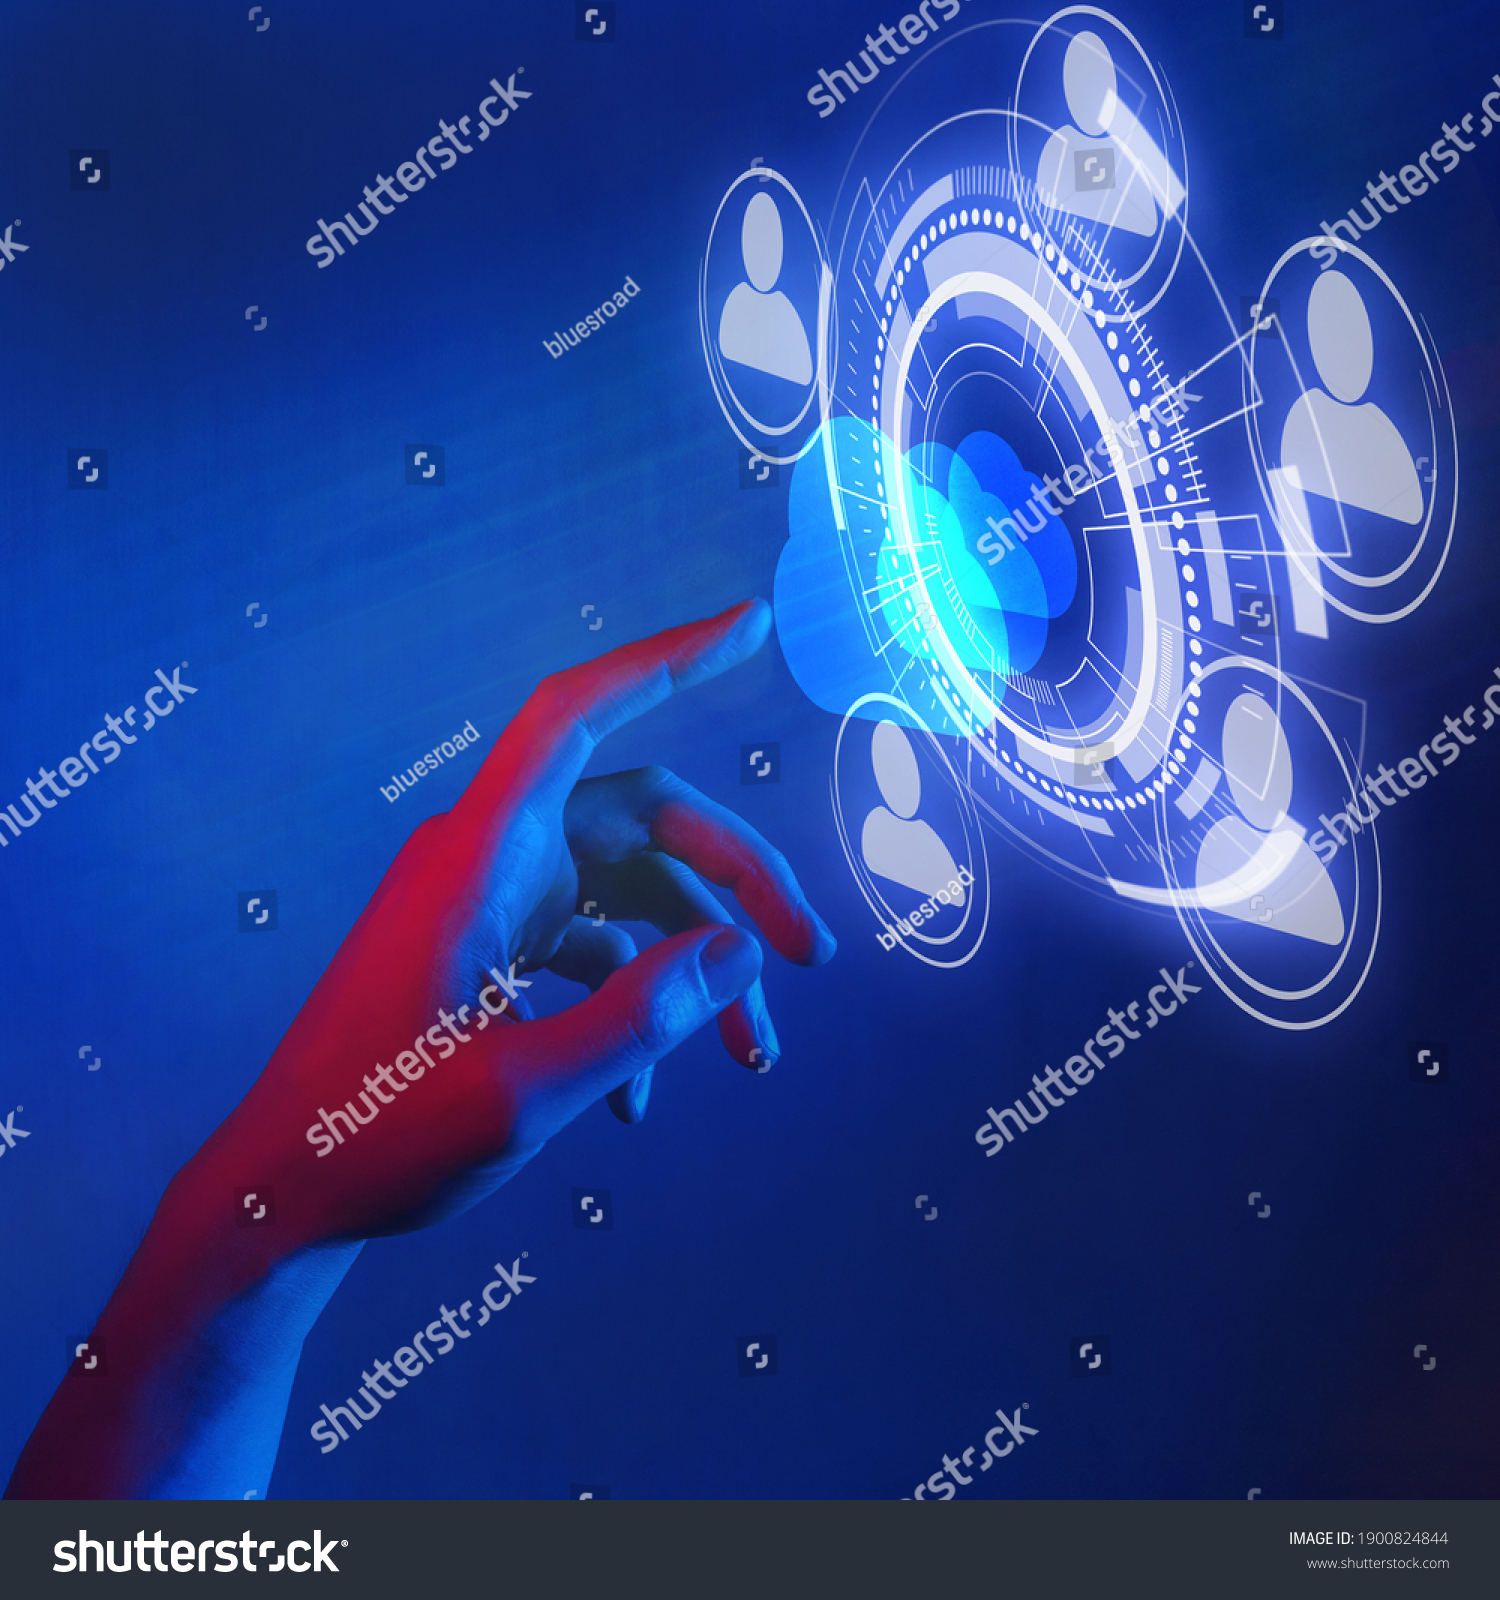 hand touching cloud symbol in neon lighting, business cloud storage network concept, networking communication, data provision and cloud computing services #1900824844